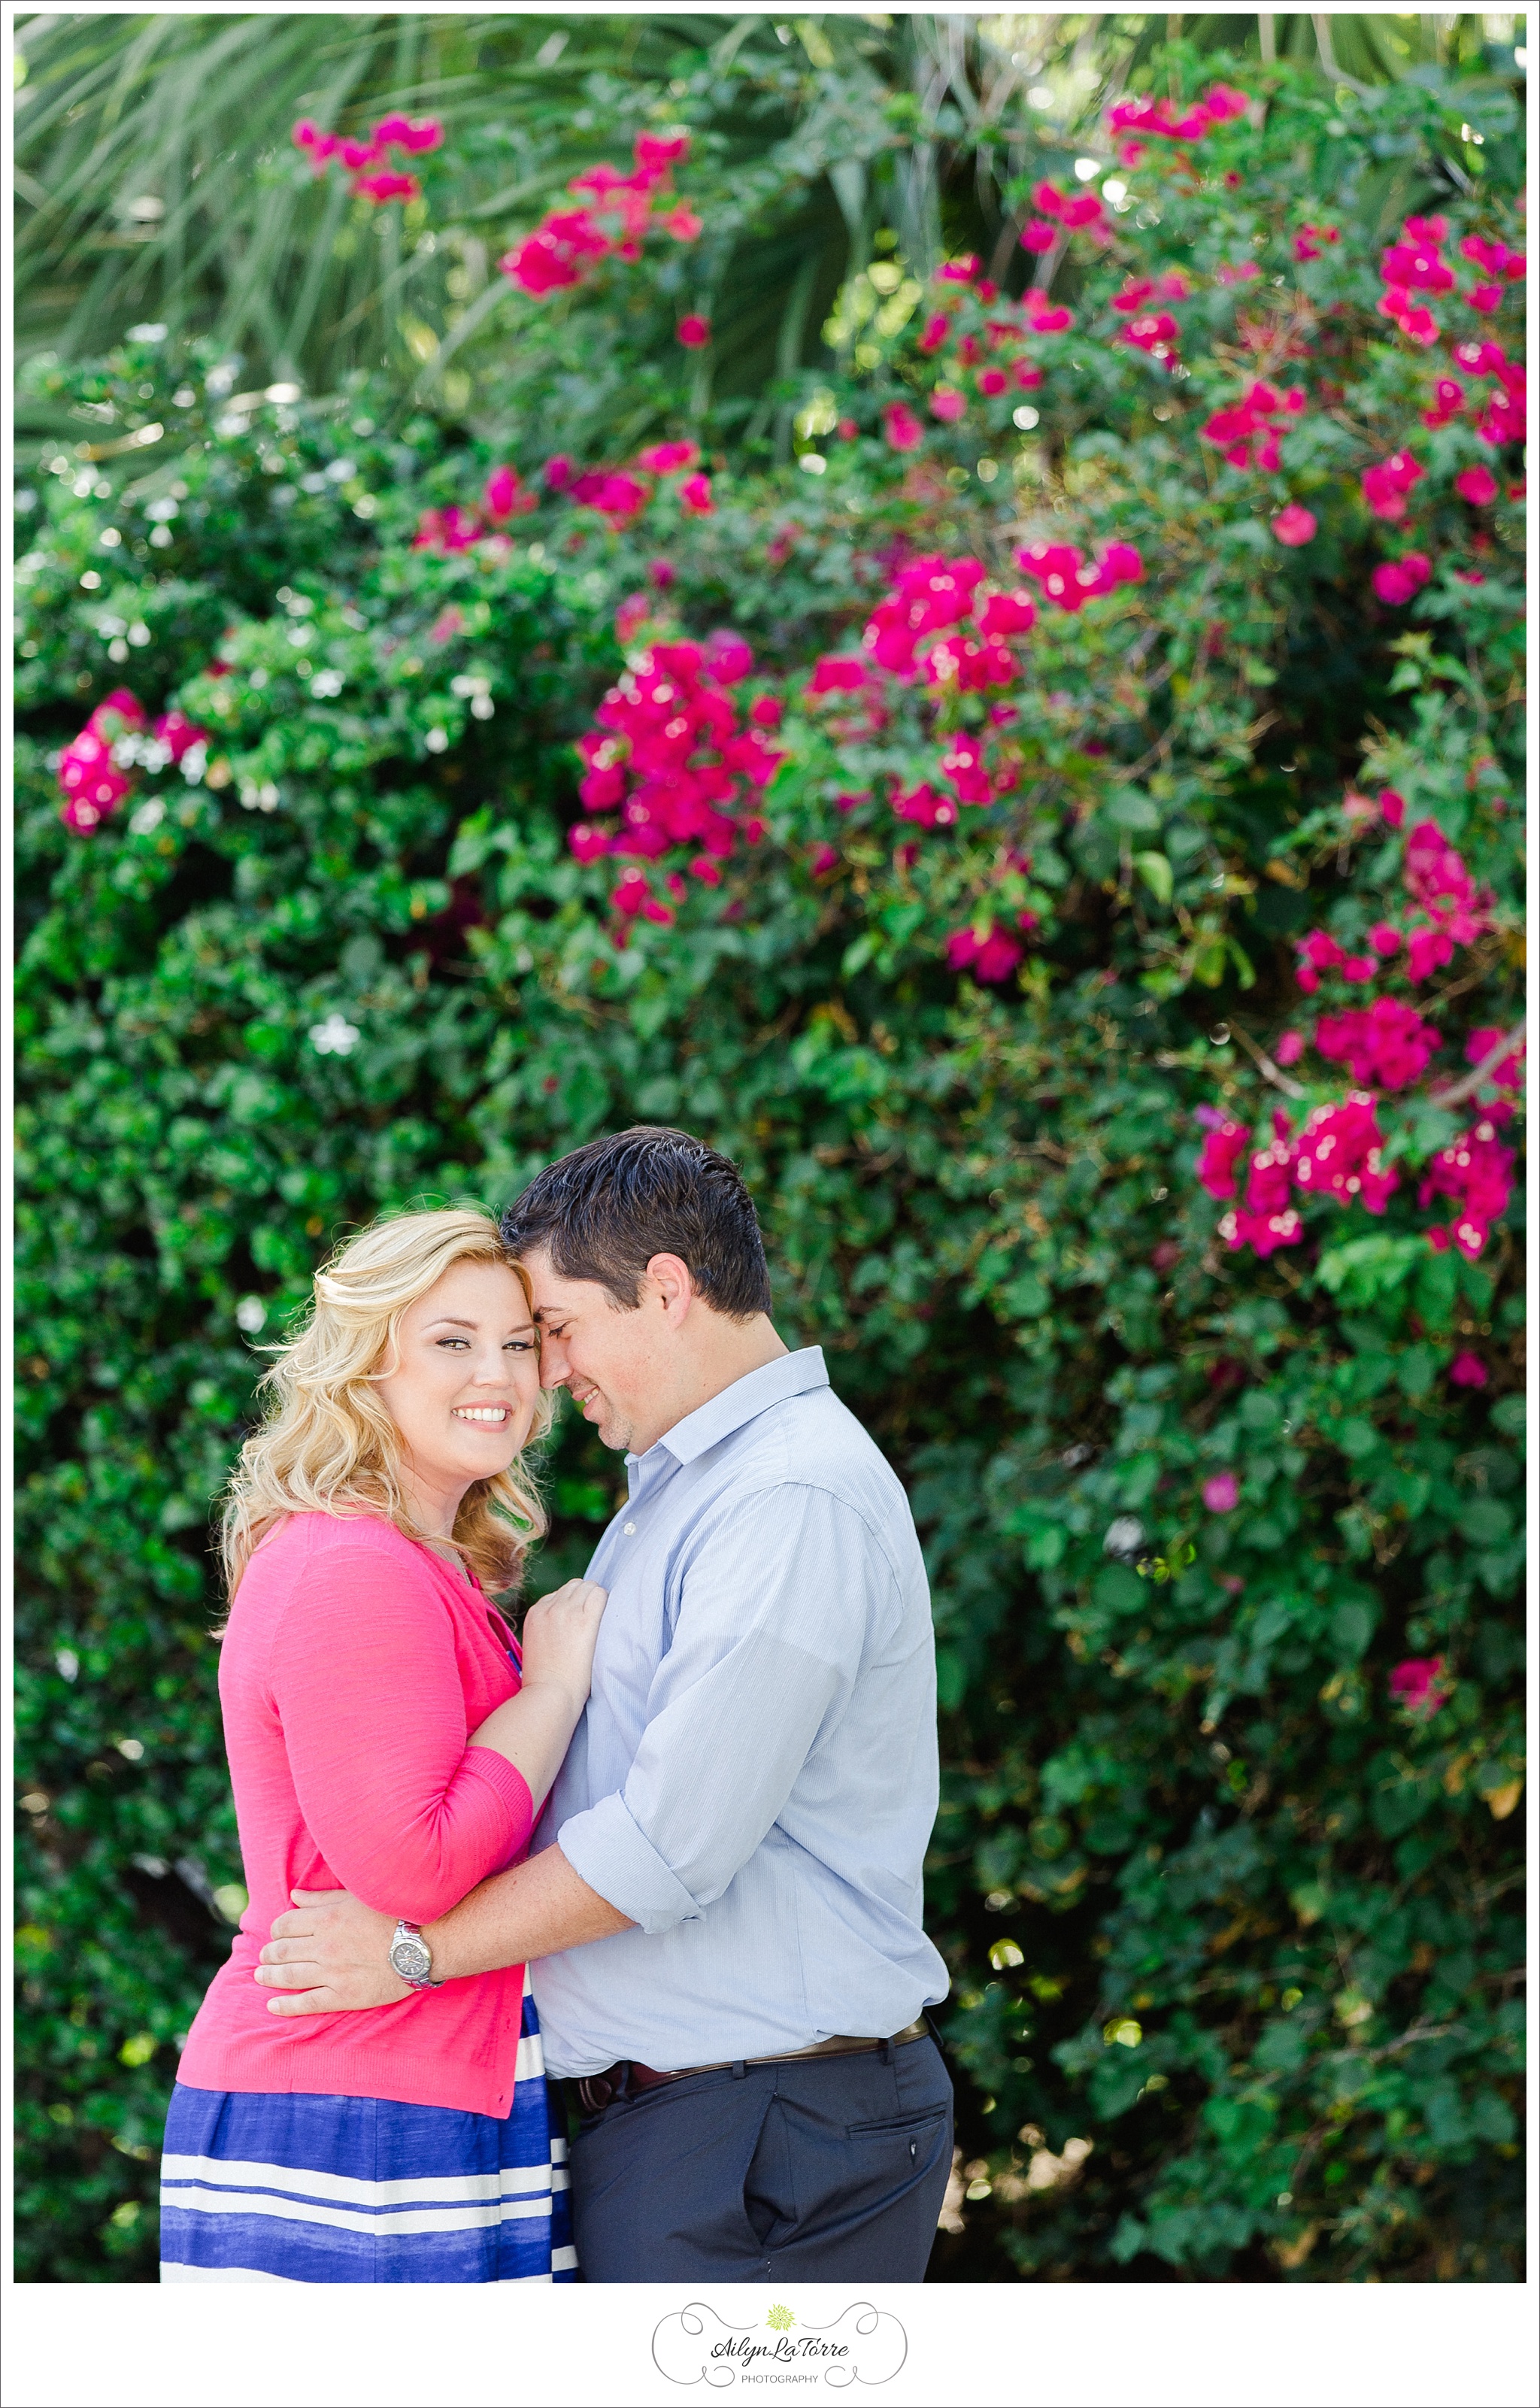 Tampa Photographer | © Ailyn La Torre Photography 2014